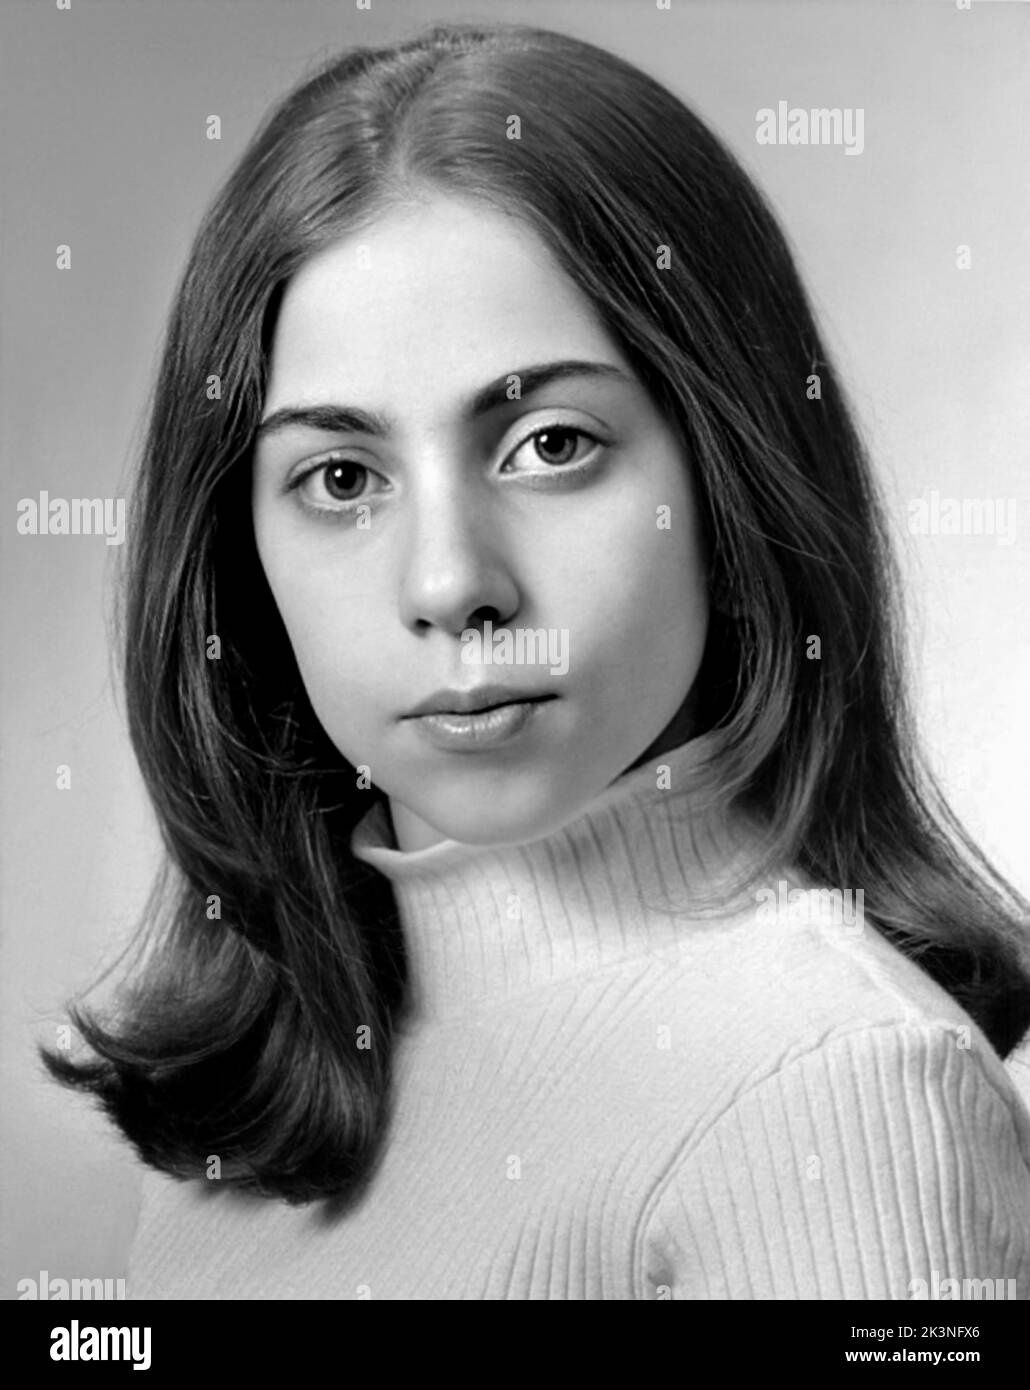 2002 , New York , USA : The celebrated american singer and actress LADY GAGA born JOANNE ANGELINA GERMANOTTA ( born 28 march 1986 ) when was a young girl aged 16 , photo from the annuary HIGH SCHOOL YEARBOOK . Unknown photographer .- HISTORY - FOTO STORICHE - ATTORE - MOVIE - CINEMA - SEX SYMBOL - personalità da bambino bambini bambina da giovane - personality personalities when was young - INFANZIA - CHILDHOOD - TEENAGER  - POP MUSIC - MUSICA - cantante  - PORTRAIT - RITRATTO --- ARCHIVIO GBB Stock Photo